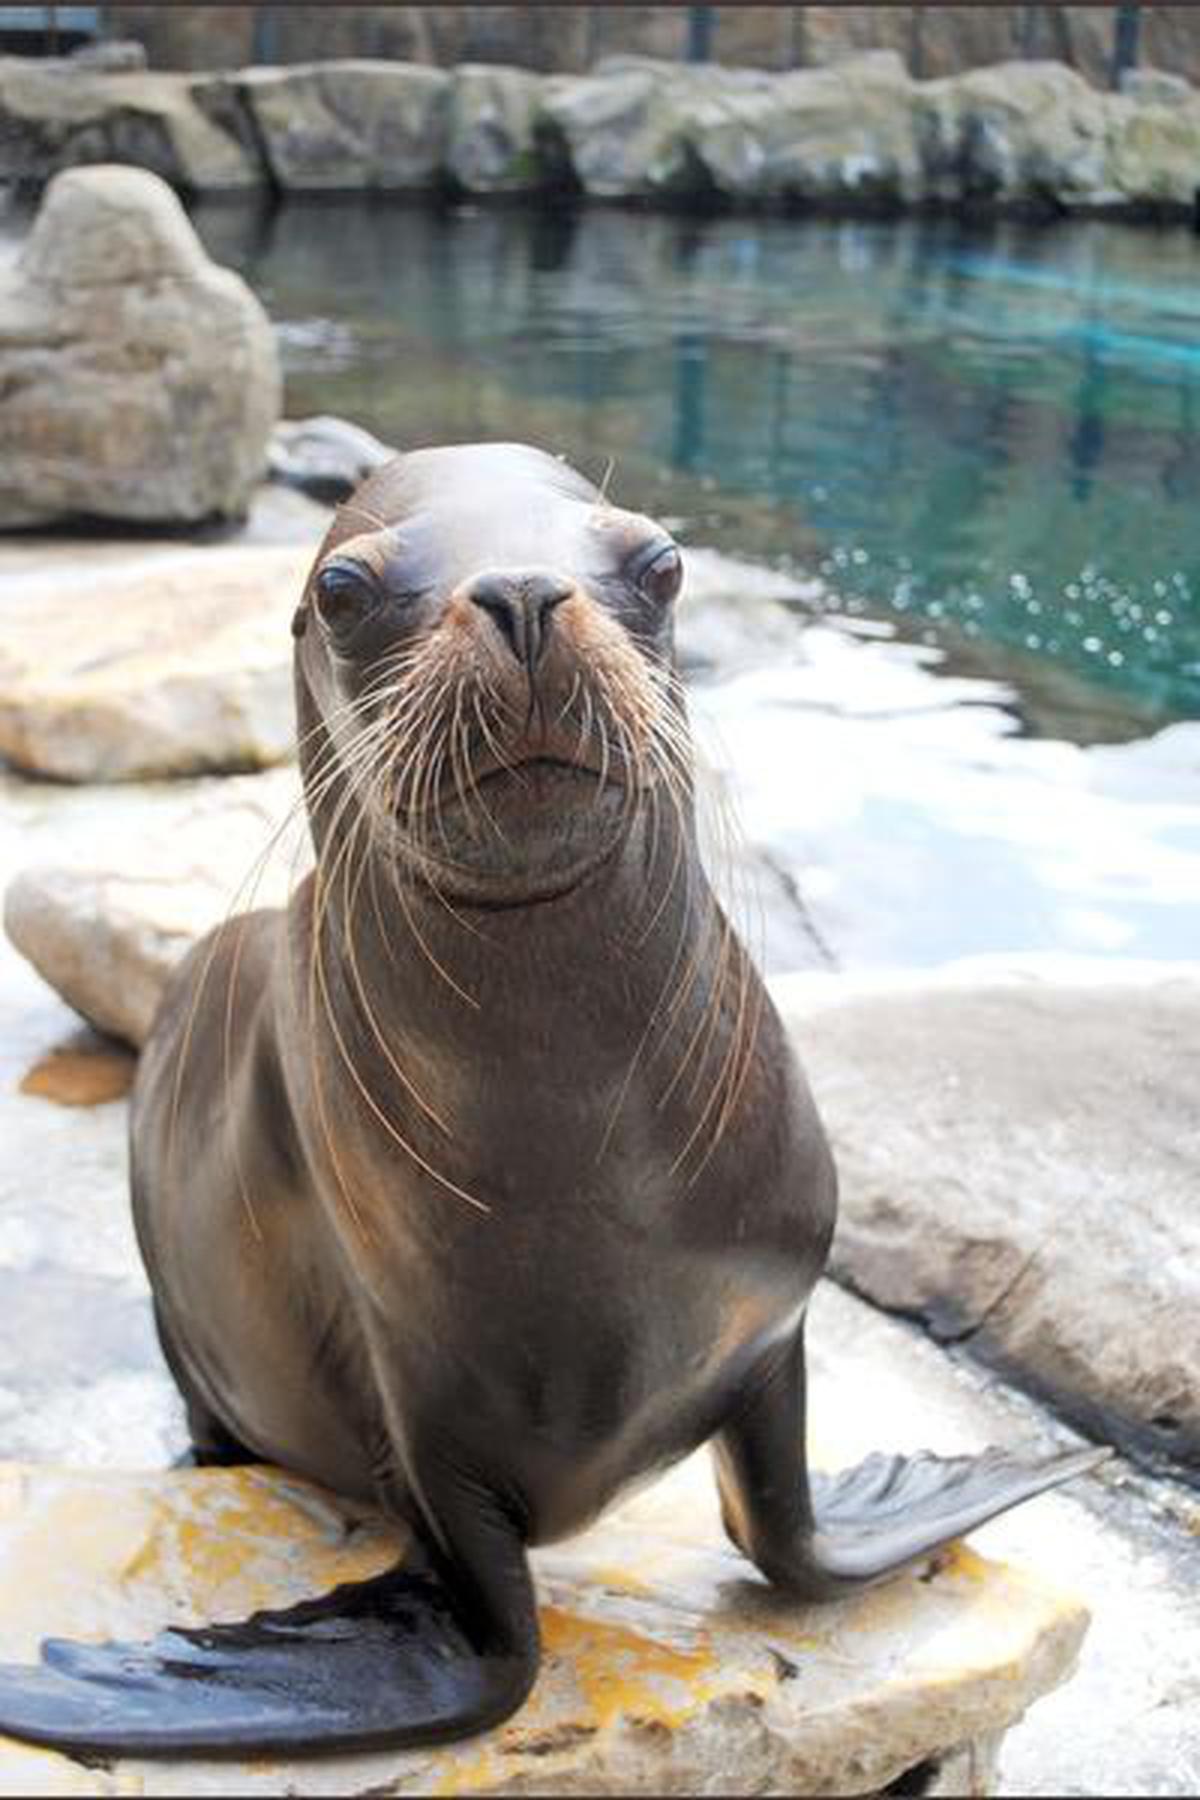 A sea lion at the Colchester Zoo